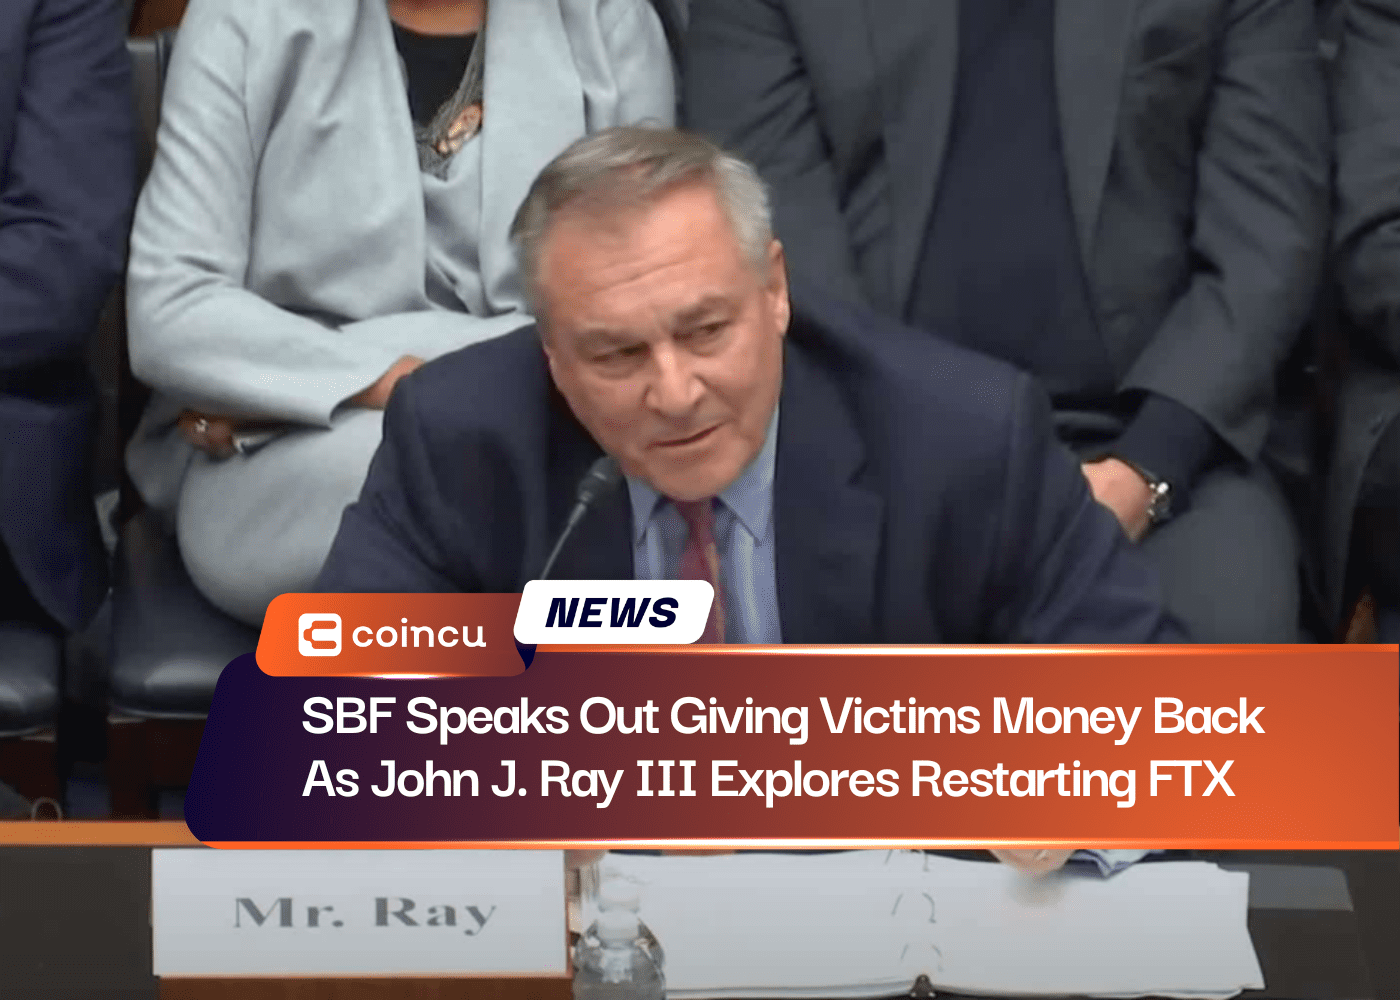 SBF Speaks Out Giving Victims Money Back As John J. Ray III Explores Restarting FTX